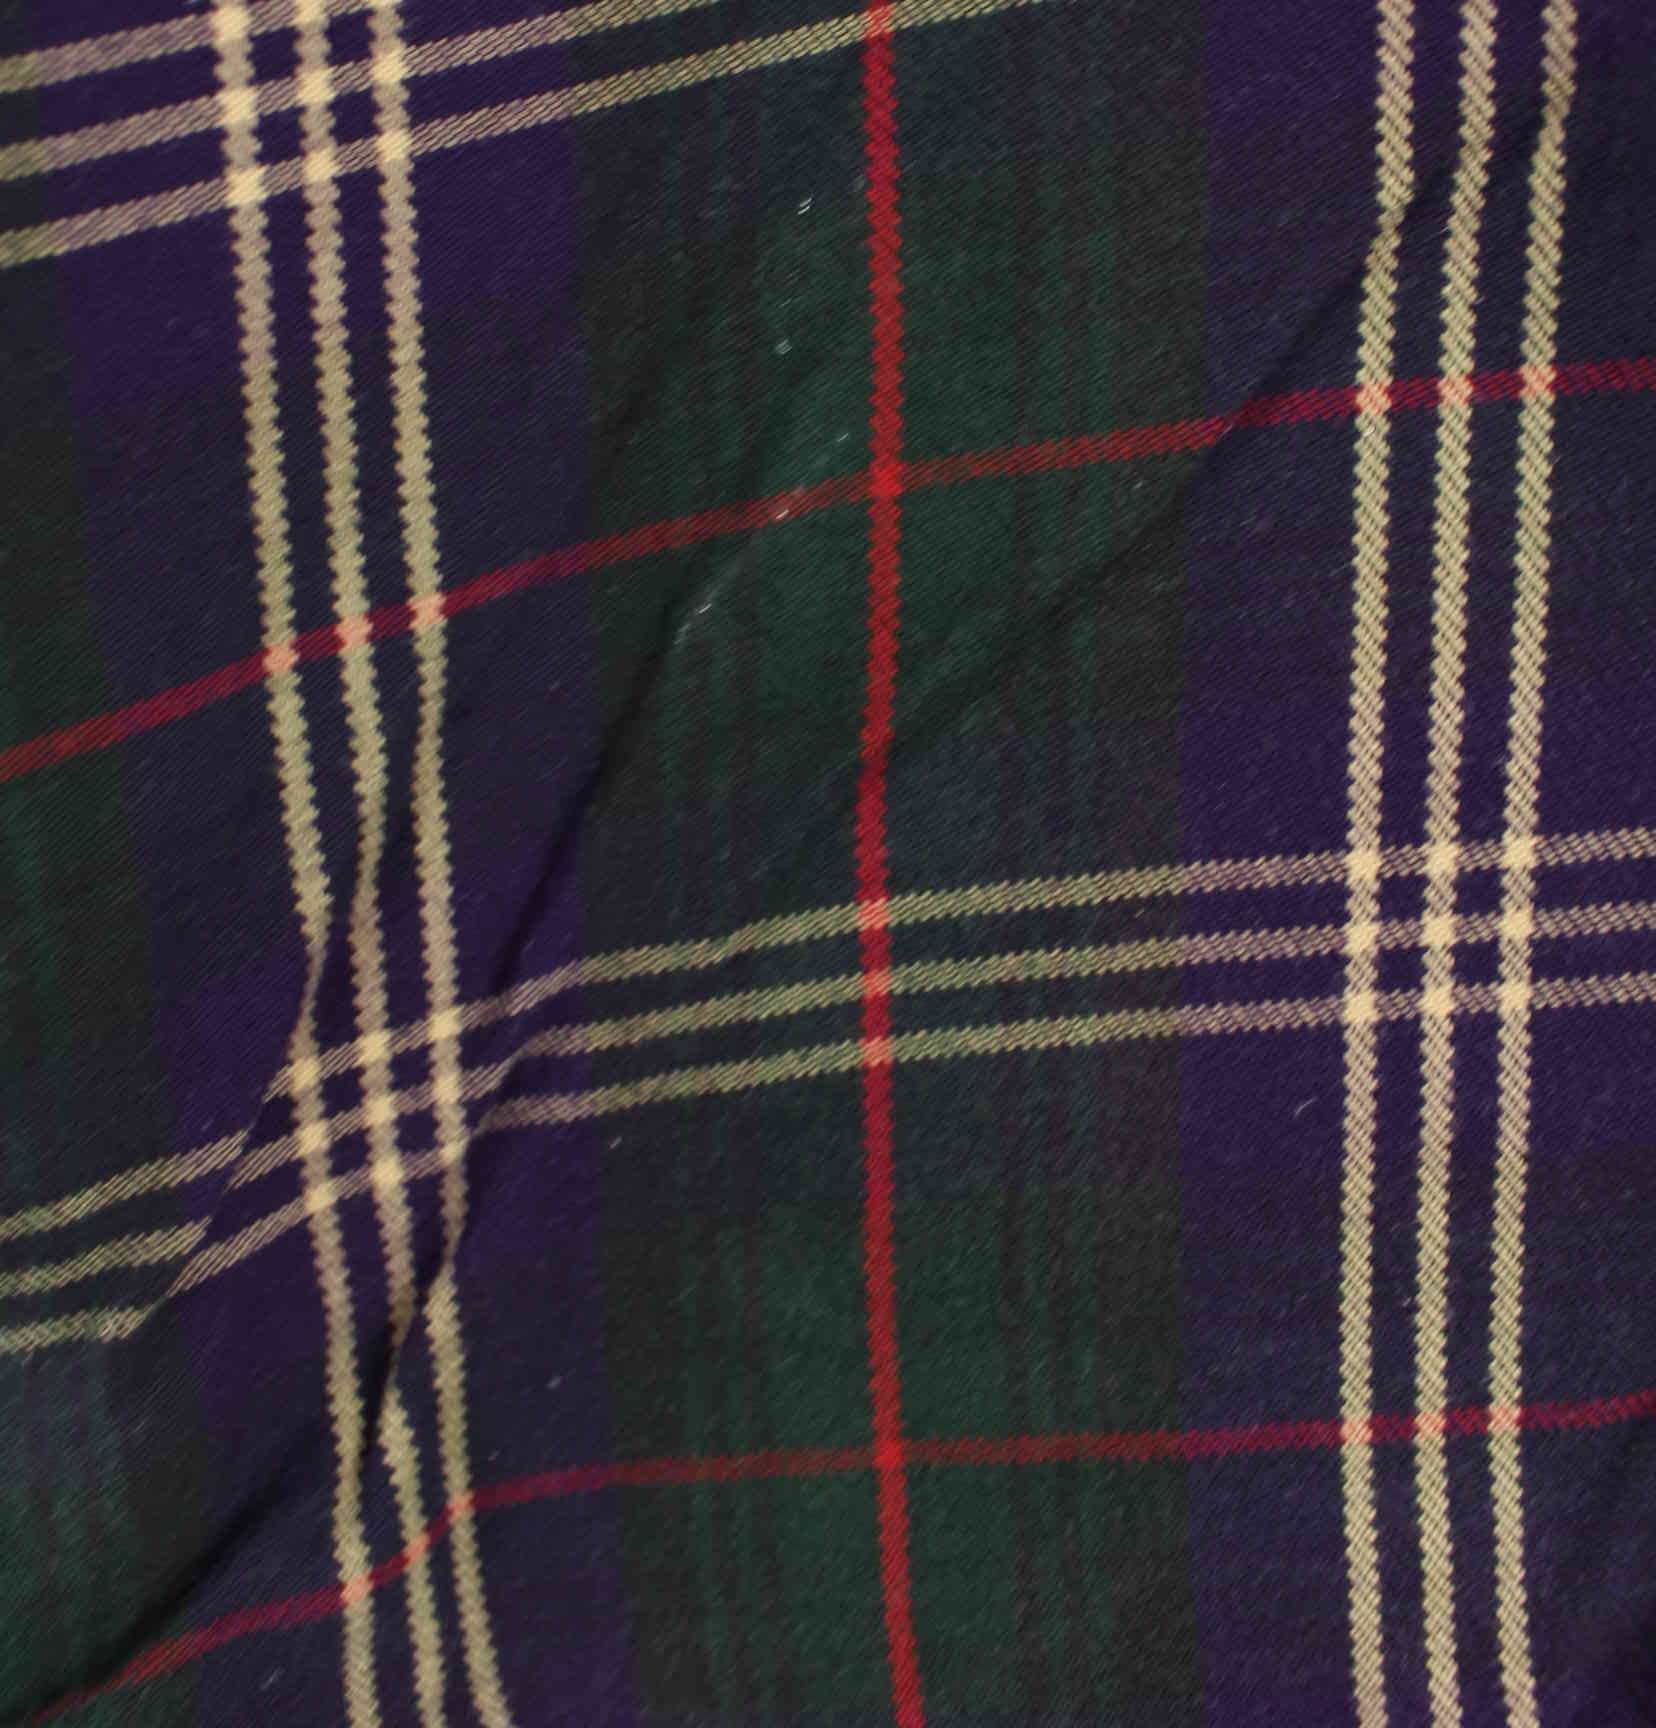 Barbour Flanell Hemd Mehrfarbig XL (detail image 4)